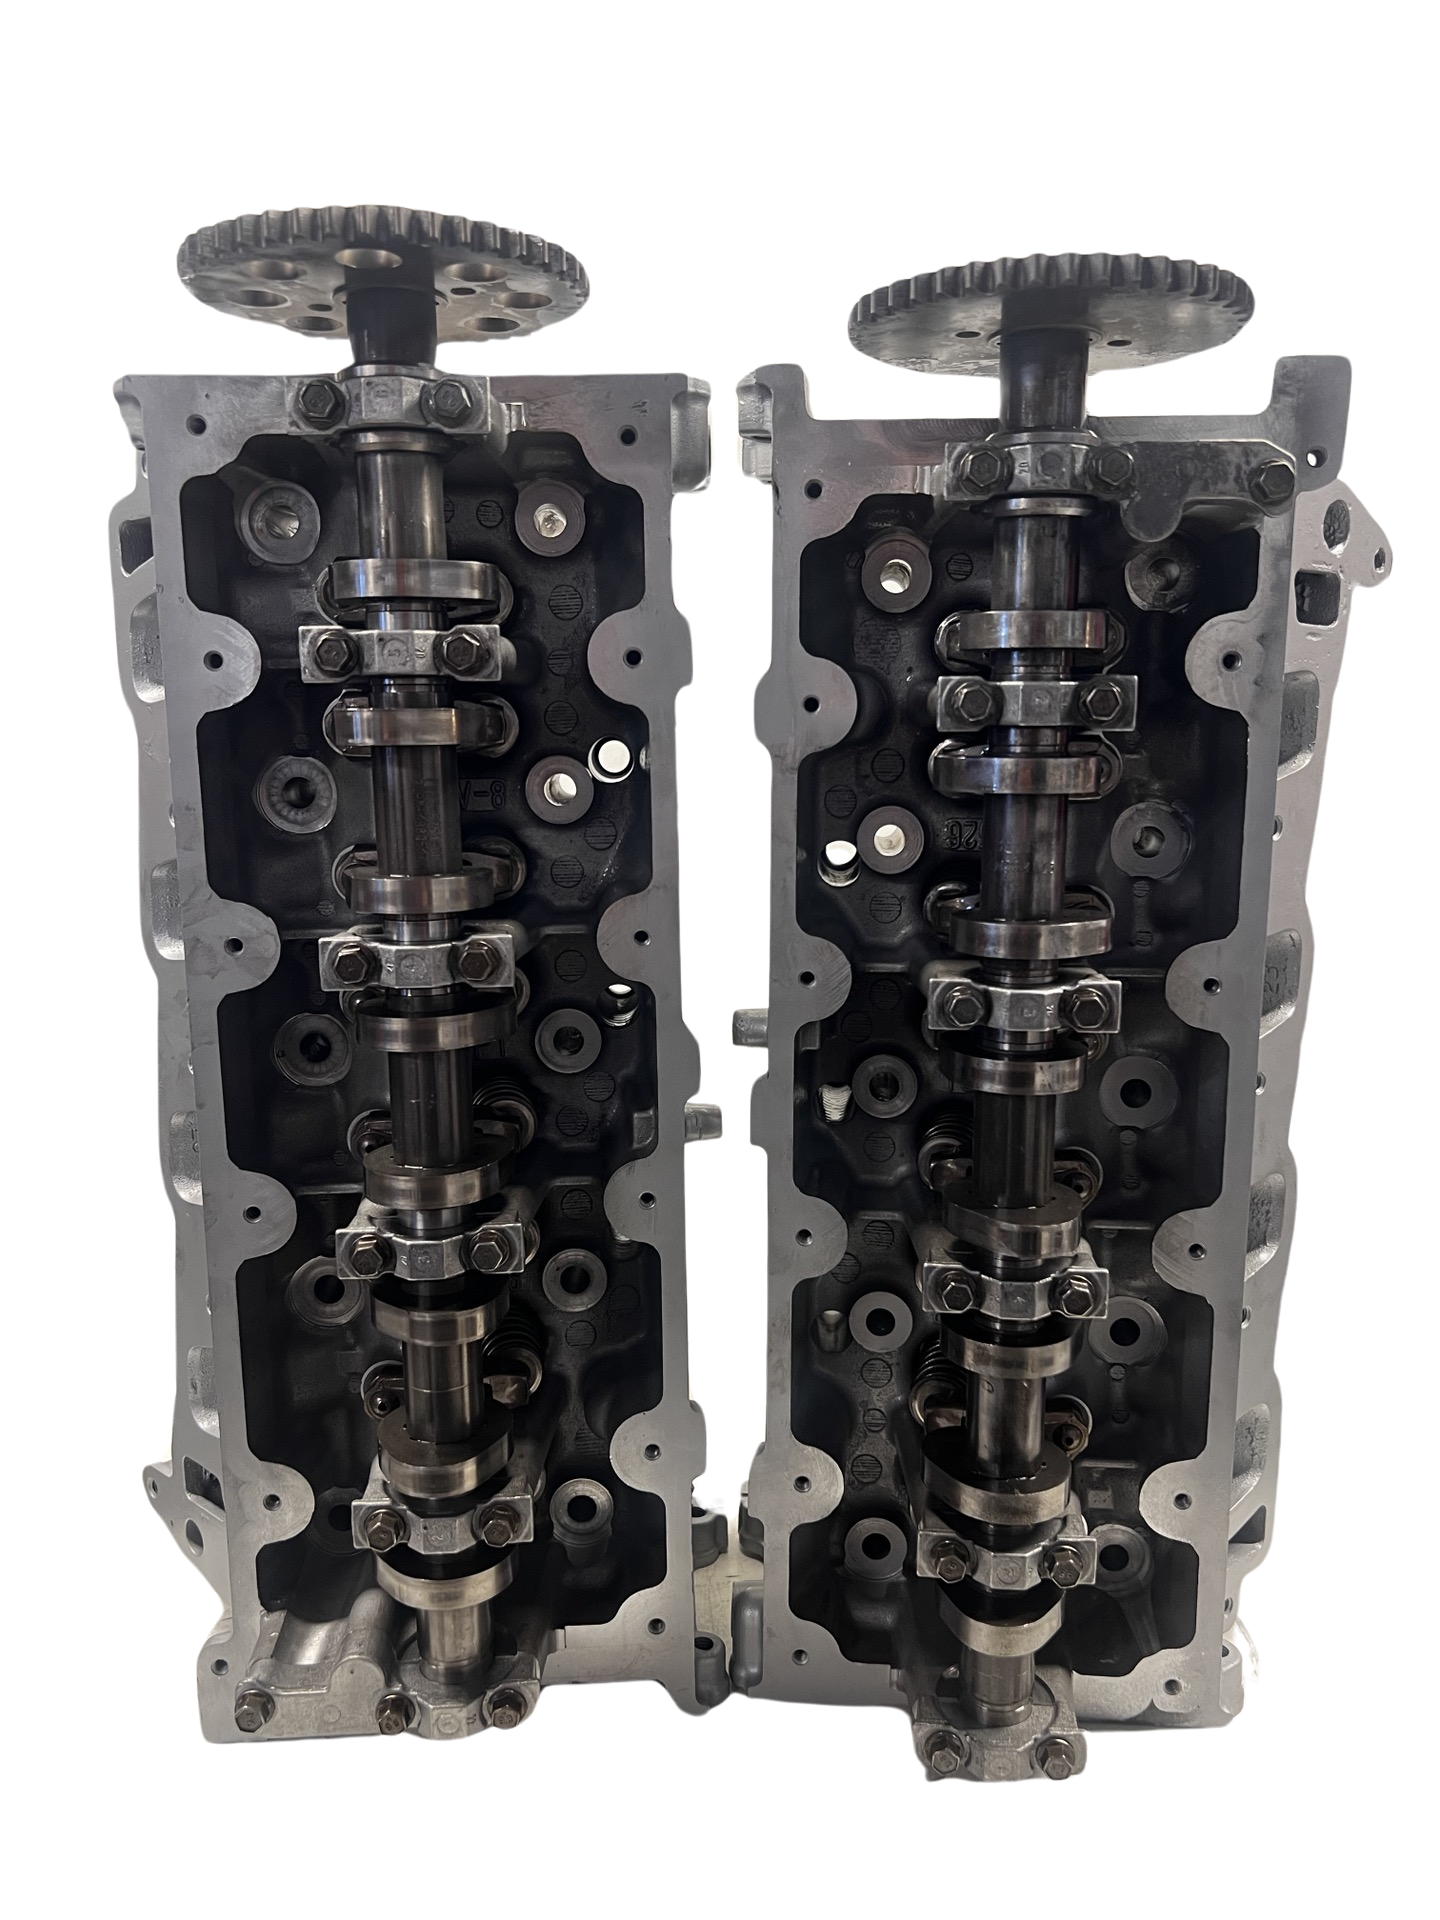 Top view of cylinder heads for a Ford 5.4L Casting #XL3E (SOLD IN PAIR)